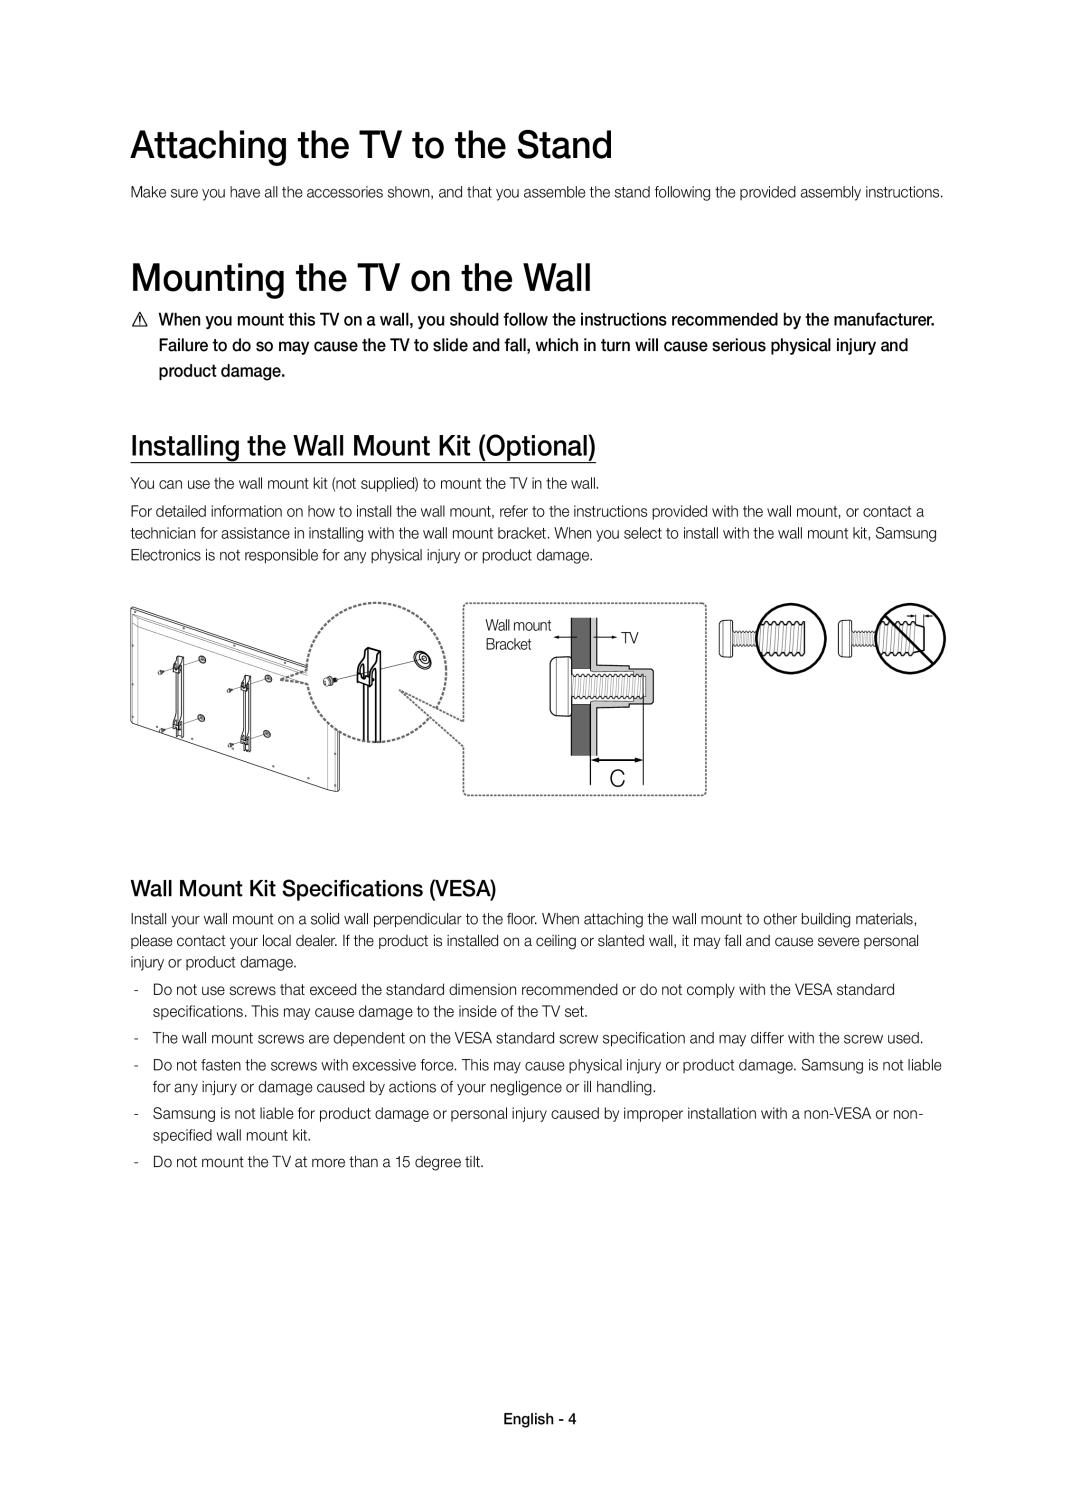 Samsung UE32H6410SSXXH Attaching the TV to the Stand, Mounting the TV on the Wall, Installing the Wall Mount Kit Optional 